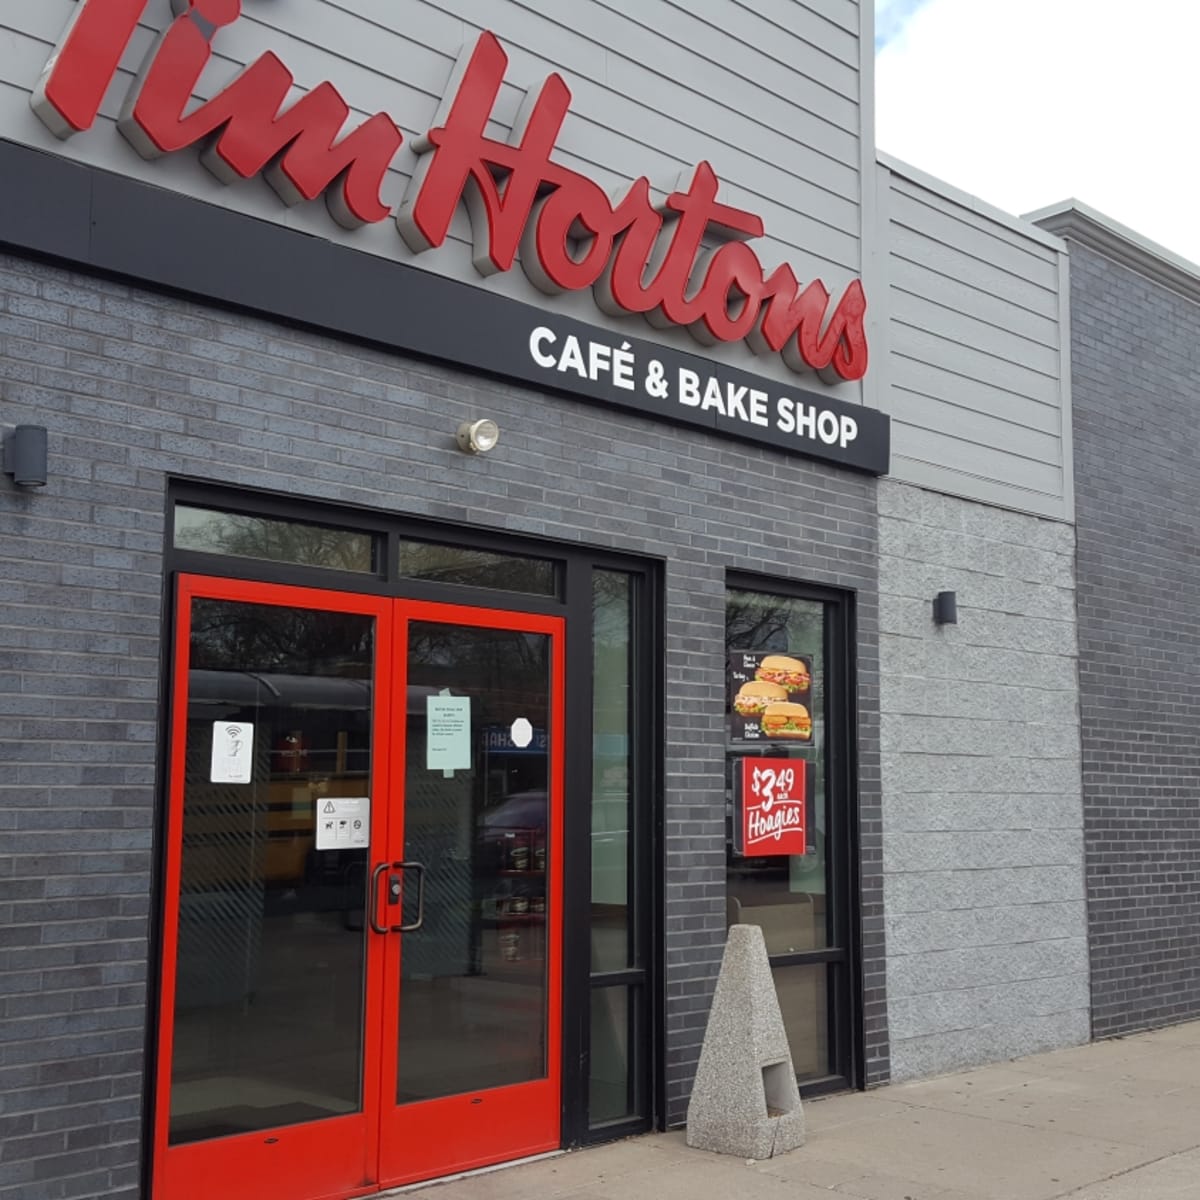 It looks like all the Twin Cities Tim Hortons locations are closed